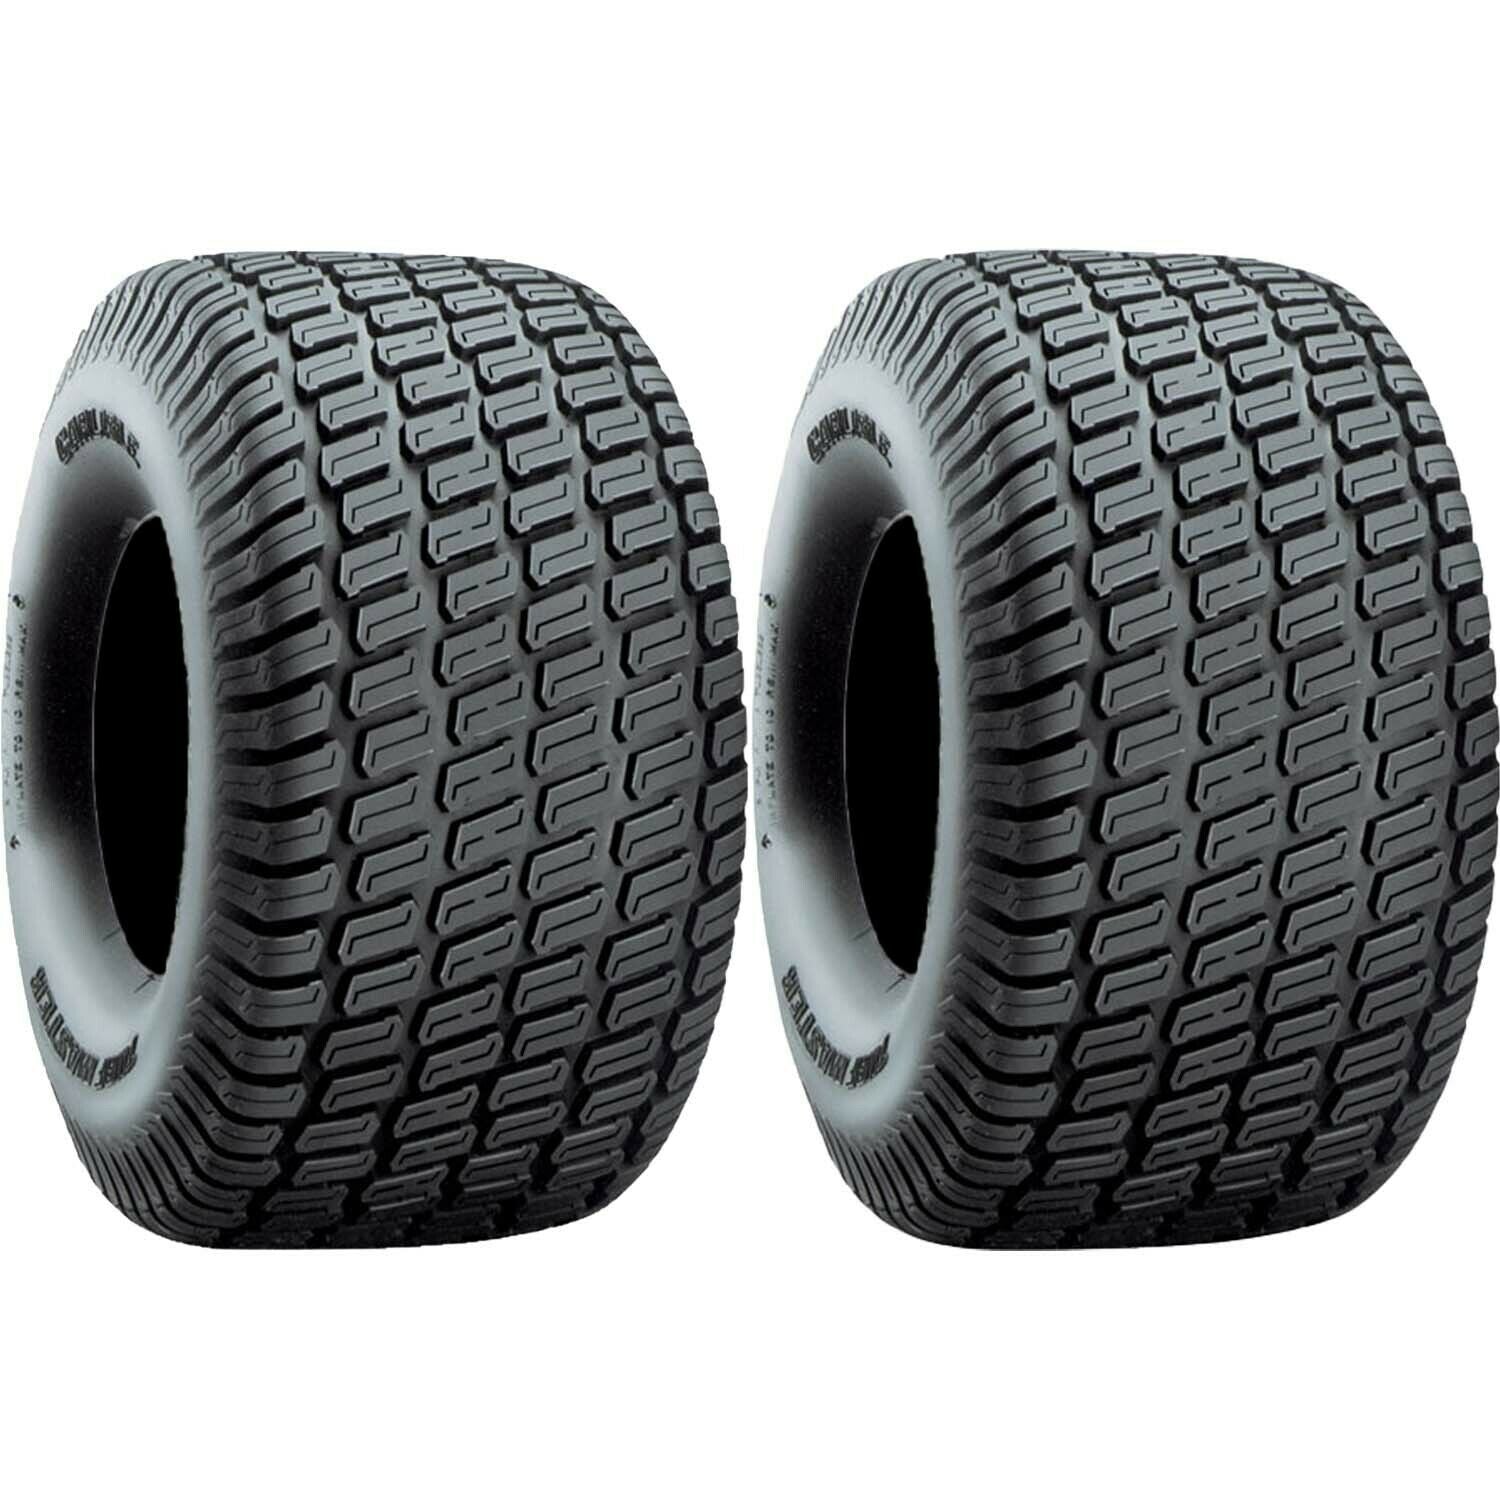 Carlisle Turf Master Lawn and Garden Tire 4Ply 22x11.00-10 - Pack of 2